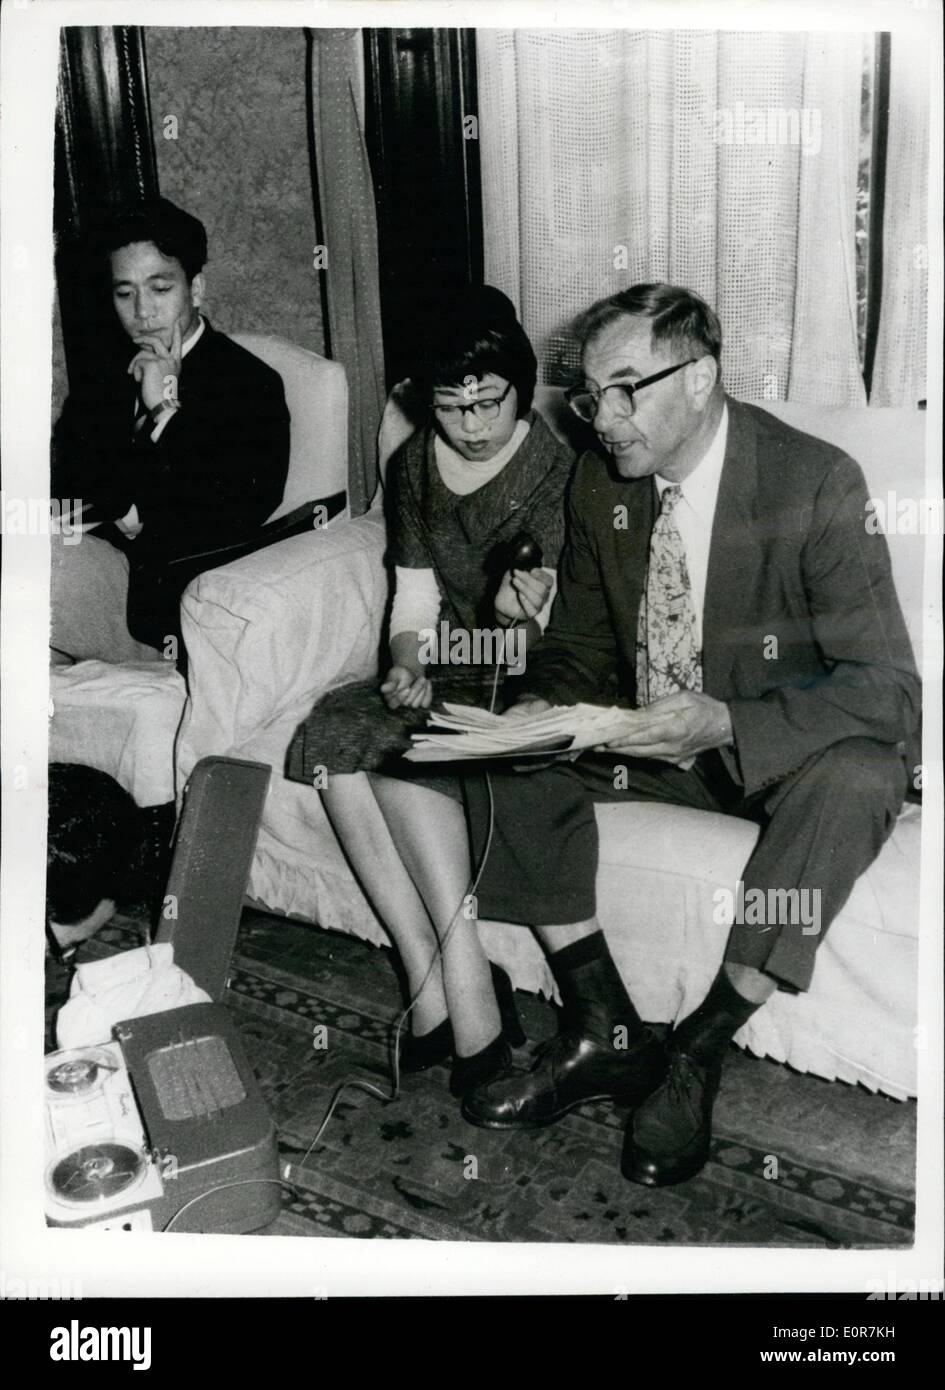 May 05, 1958 - American Attorney Interviewing Hiroshima ''A'' Bomb Victim. He Files Anti Nuclear Bomb Suit Against U.S. Government.: Dr. Abraham Lincoln Wirin (right) interviews Japanese girl Michiko Saka (25) IN Tokyo - where Dr. Wirin - an American Attorney - is collecting materials to support his case - for he has filed an anti- nuclear bomb test suit against the United States Government . Michiko Saka was a victim of the Hiroshima bomb - and recently visited the U.S. for plastic surgery on her face - to repair damaged cause by the bomb. Dr Stock Photo